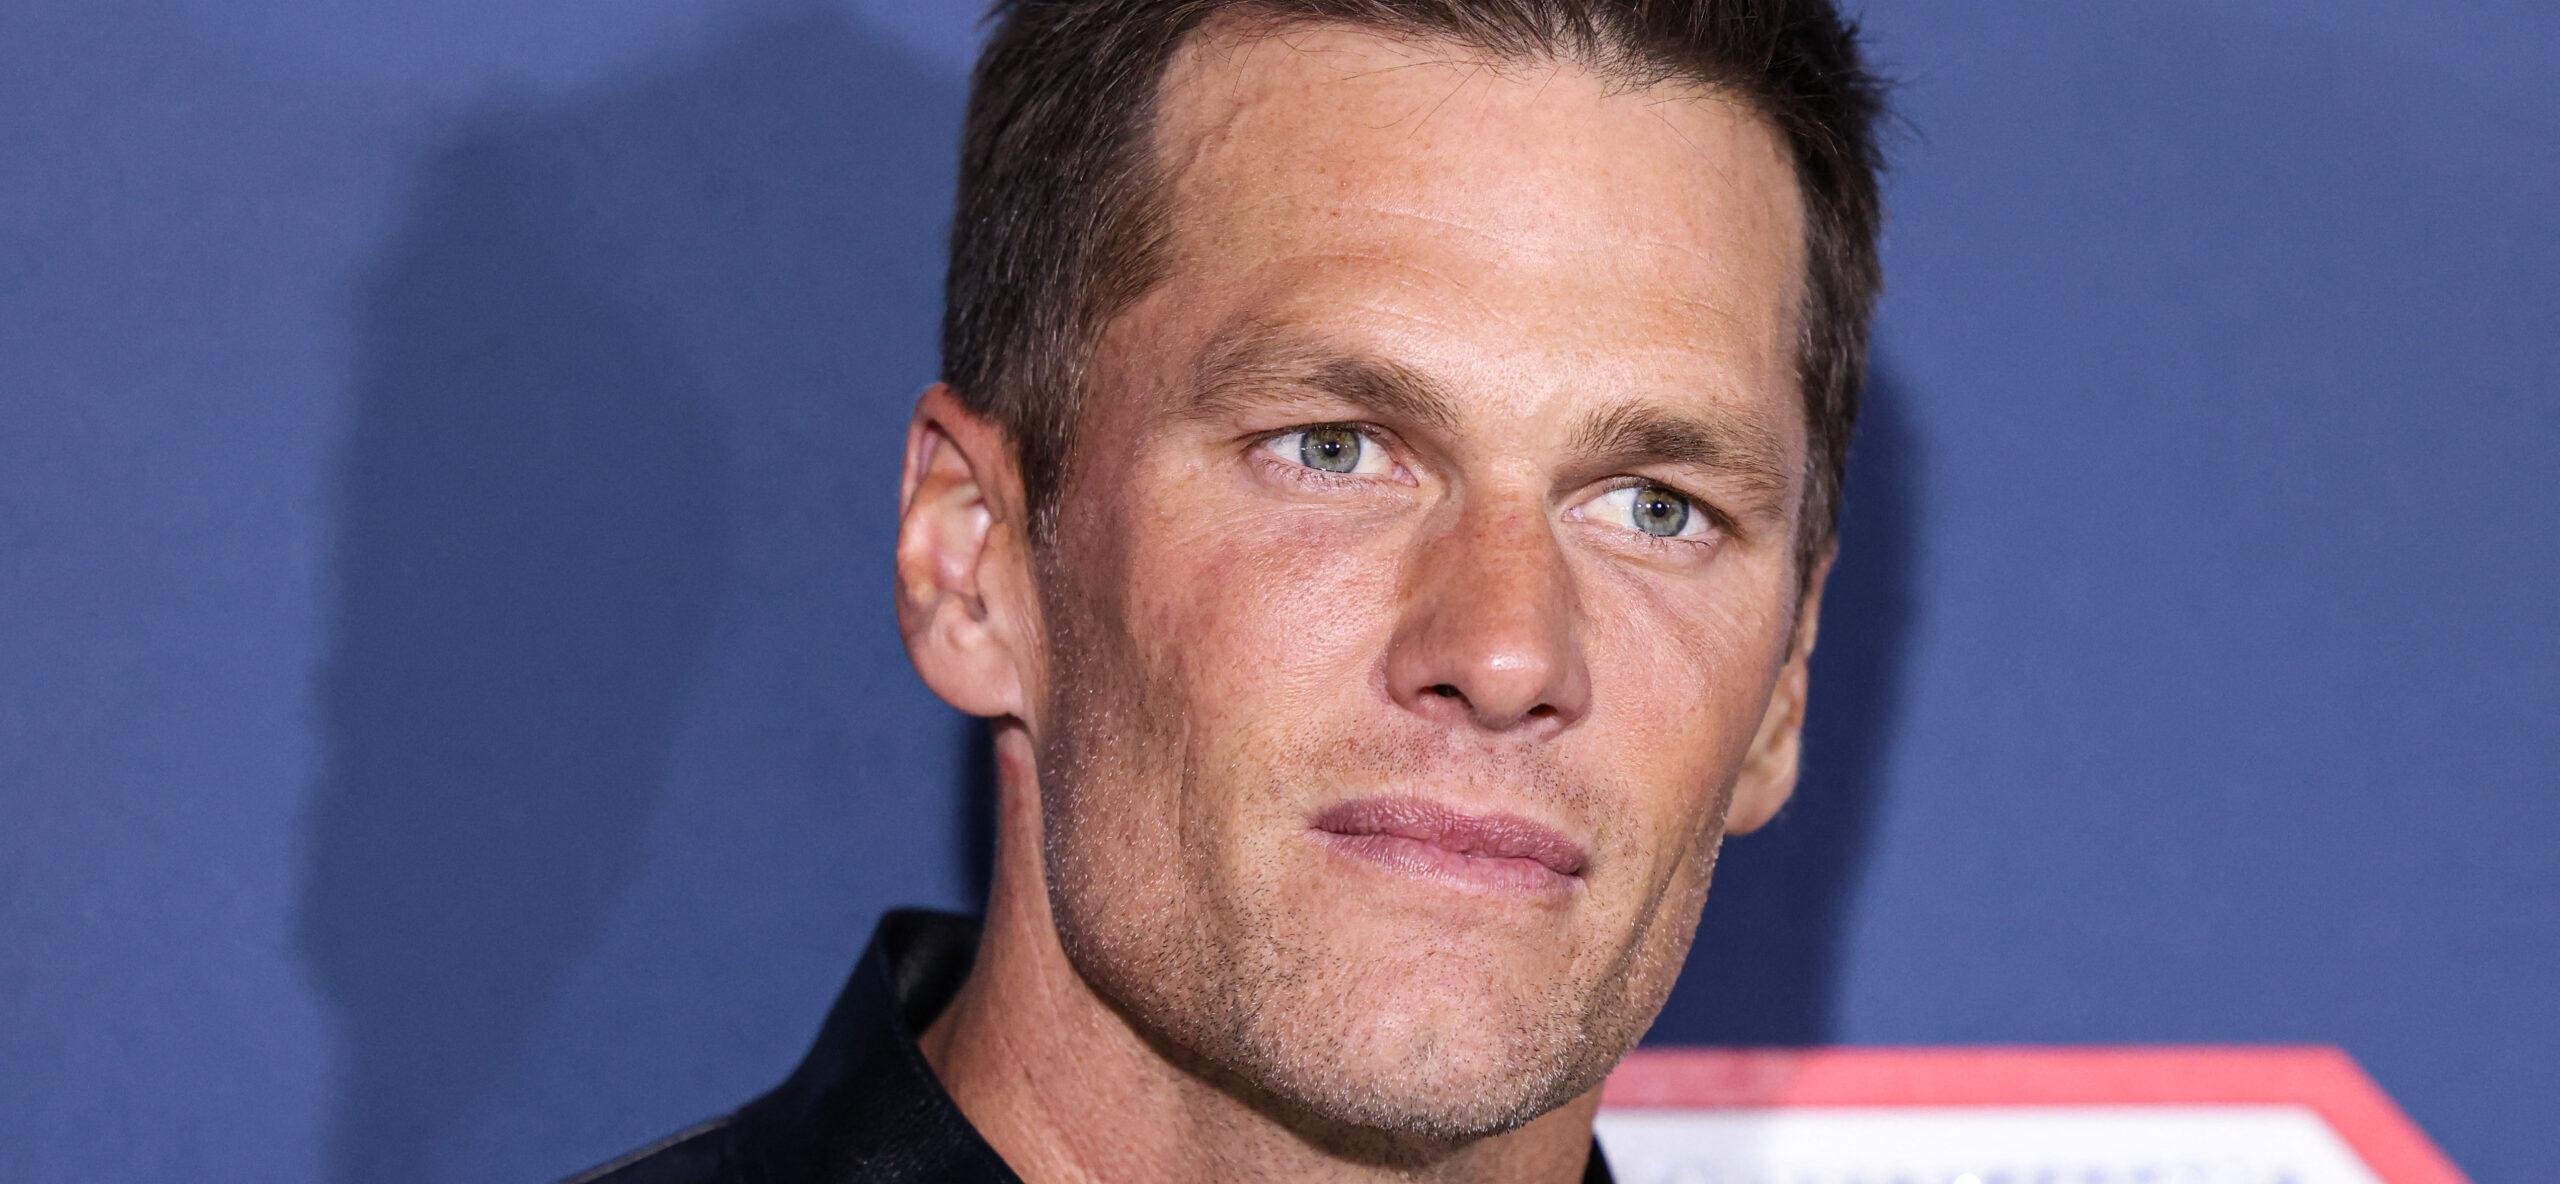 Tom Brady’s Ex Shares Cryptic Post After Roast